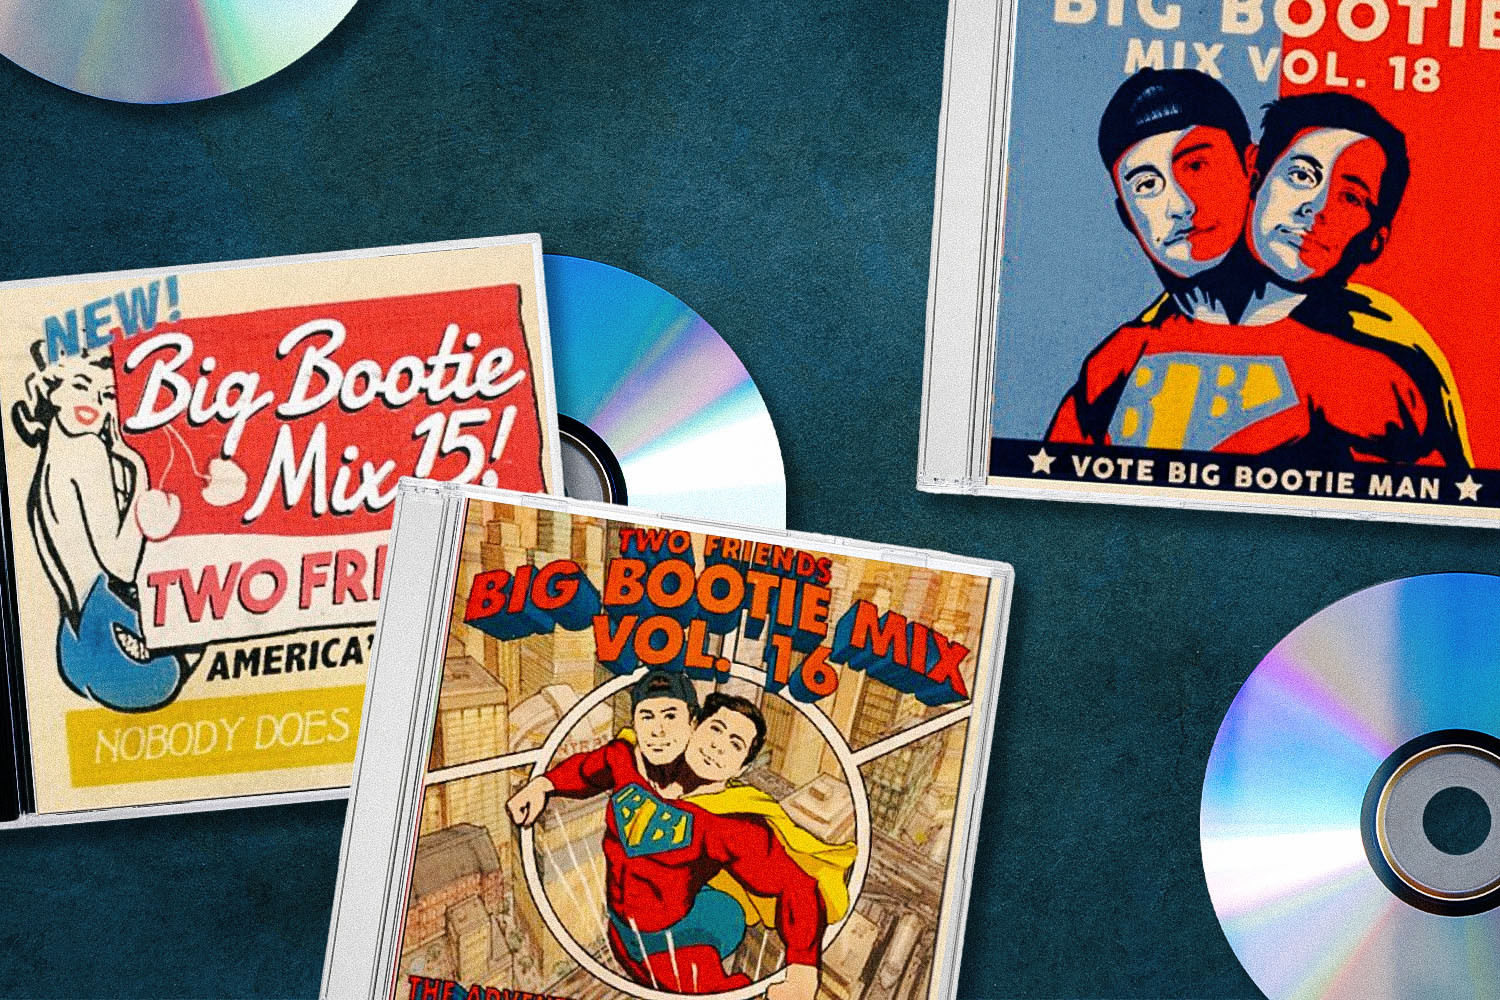 Want to Immediately Improve Your Workouts? Start Listening to “Big Bootie Mixes.”